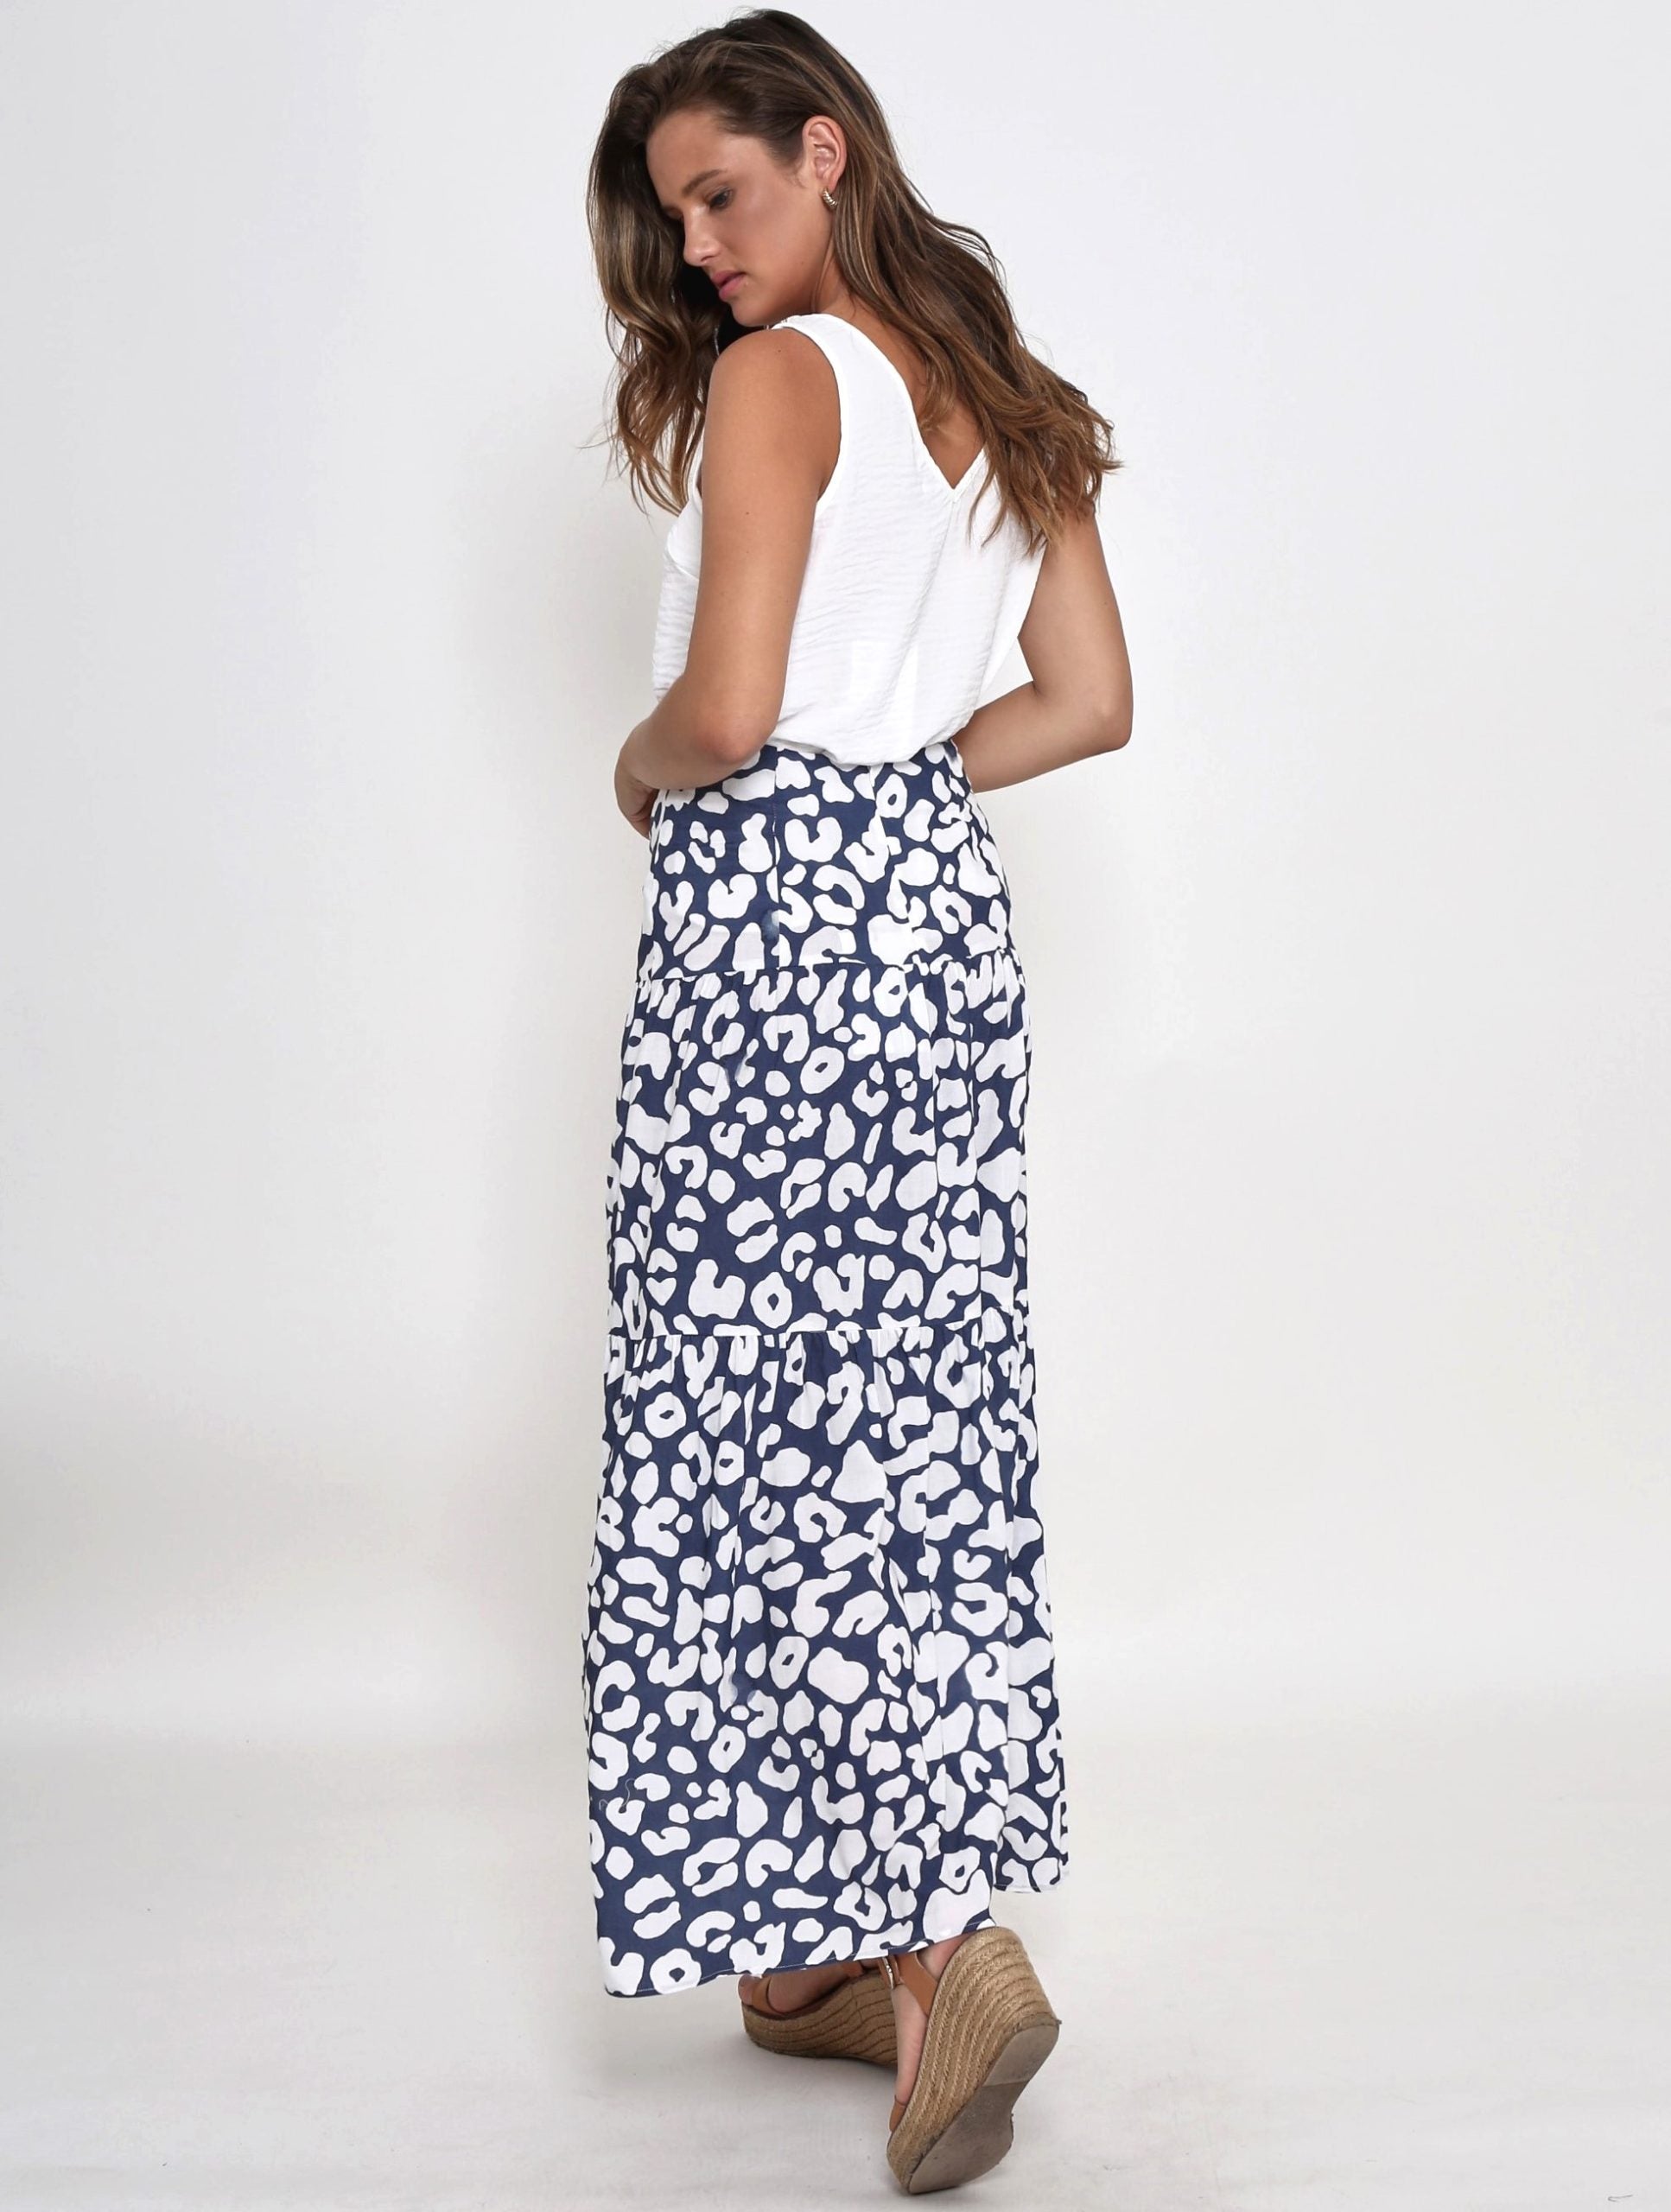 Experience ultimate style and comfort with our navy leopard print cotton long skirt. Perfect for any look, any occasion. Shop today and shine!